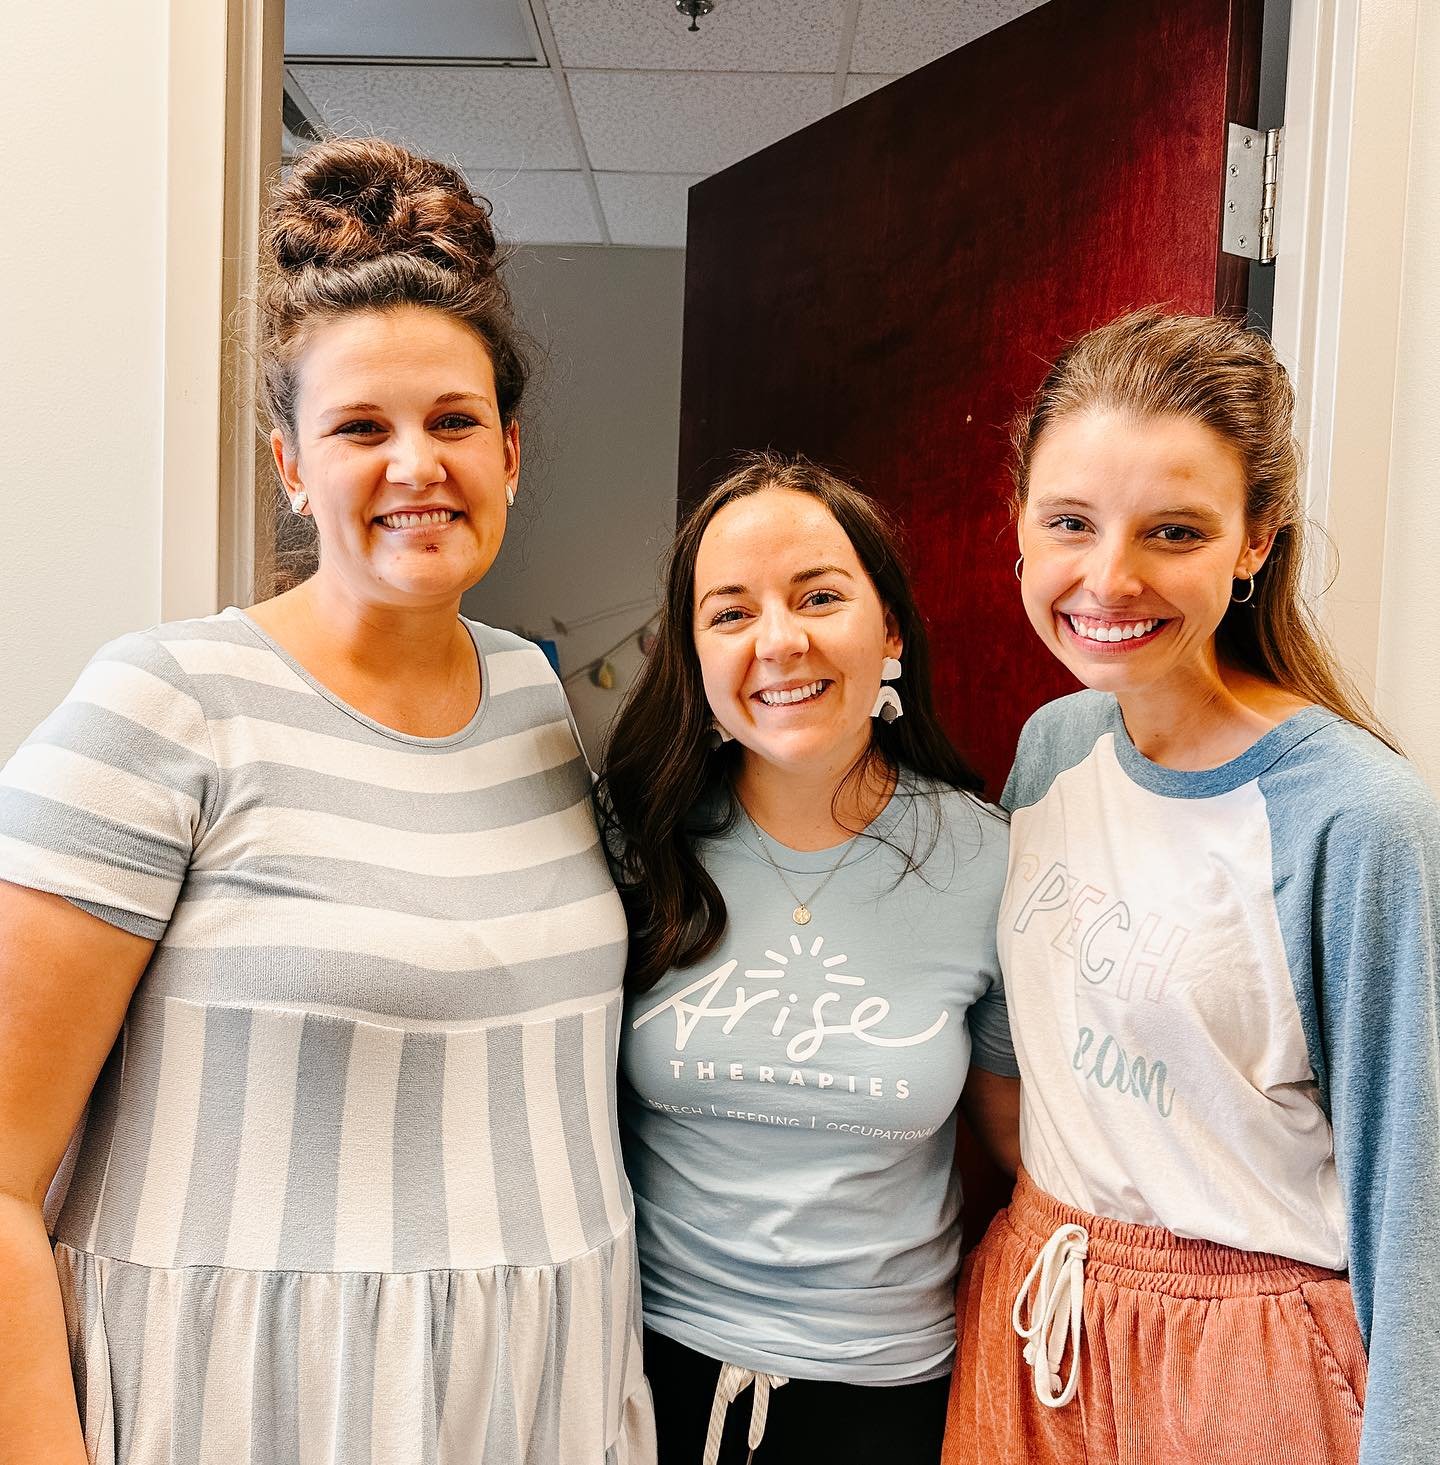 We have loved having Mrs. Aubrey with us the past few weeks!! We wish her well on her next graduate school placement and then graduation! 🎓 Thanks for all you did for our friends at Arise! 💙
&bull;
#arisetherapies #lovewhatwedo #slp #slps #speechpa